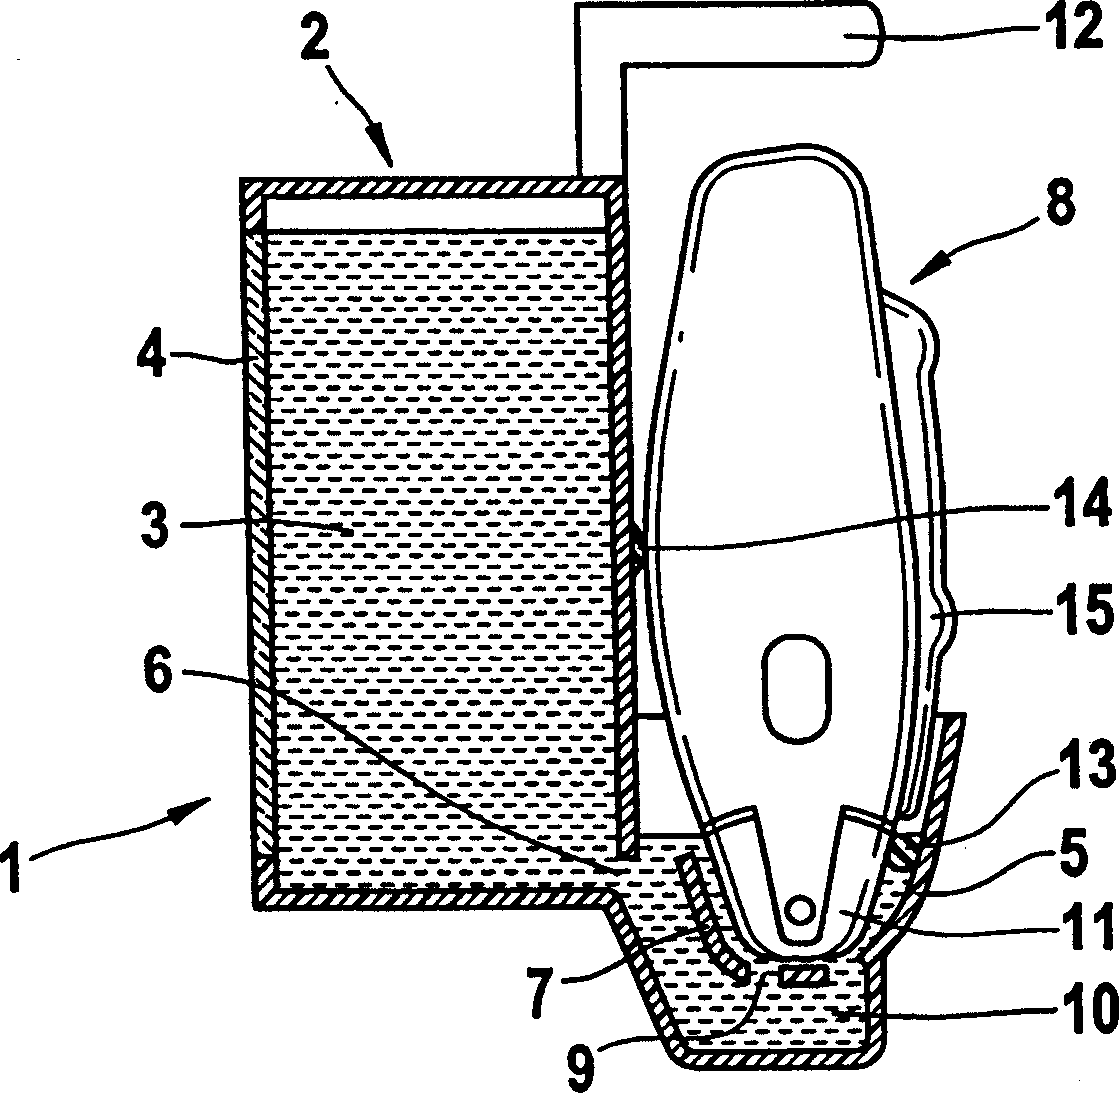 Shaving apparatus cleaning device